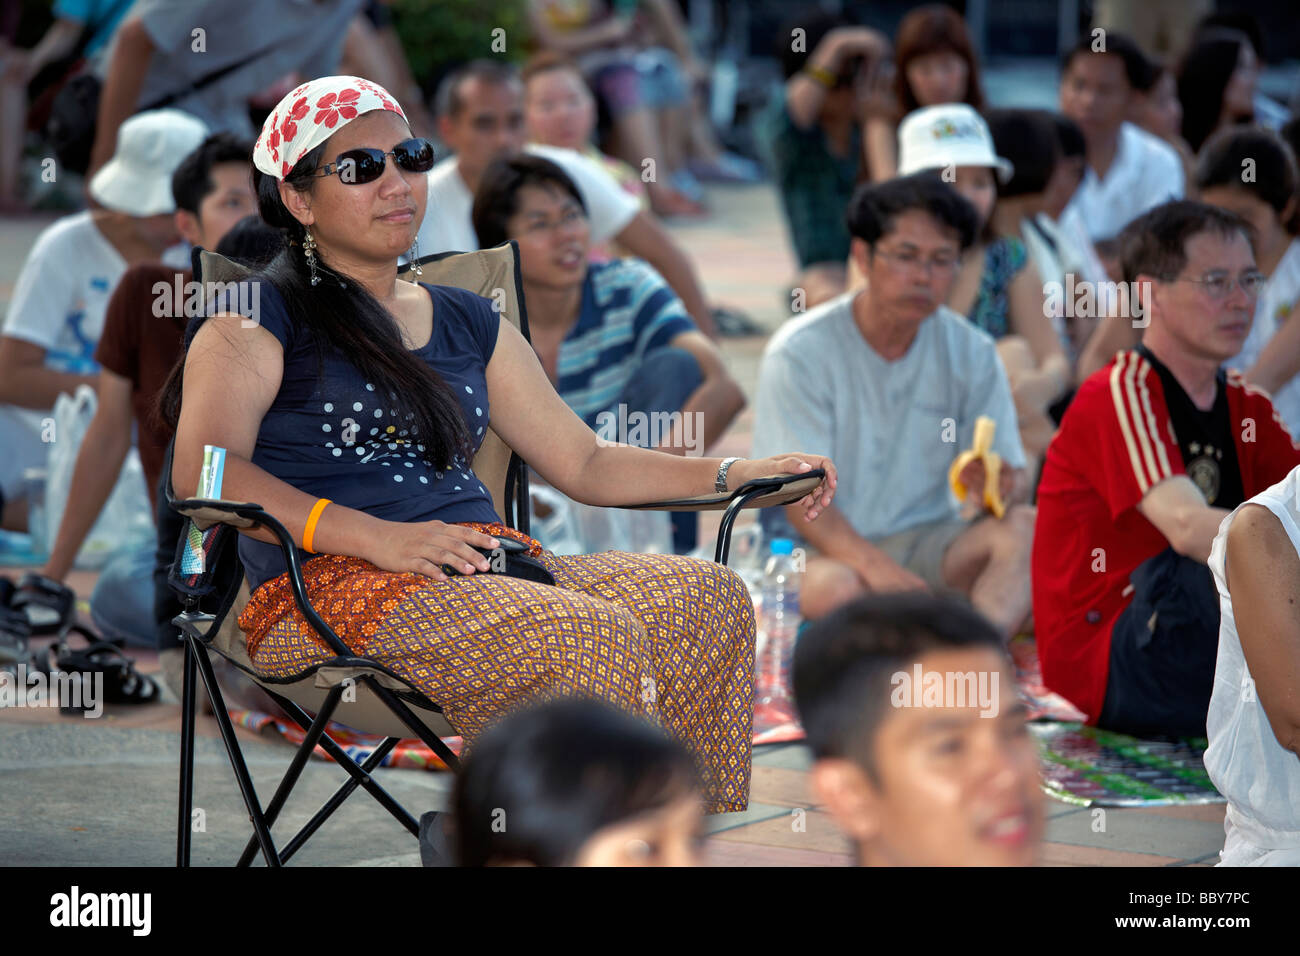 A woman seated and alone in a crowd Stock Photo